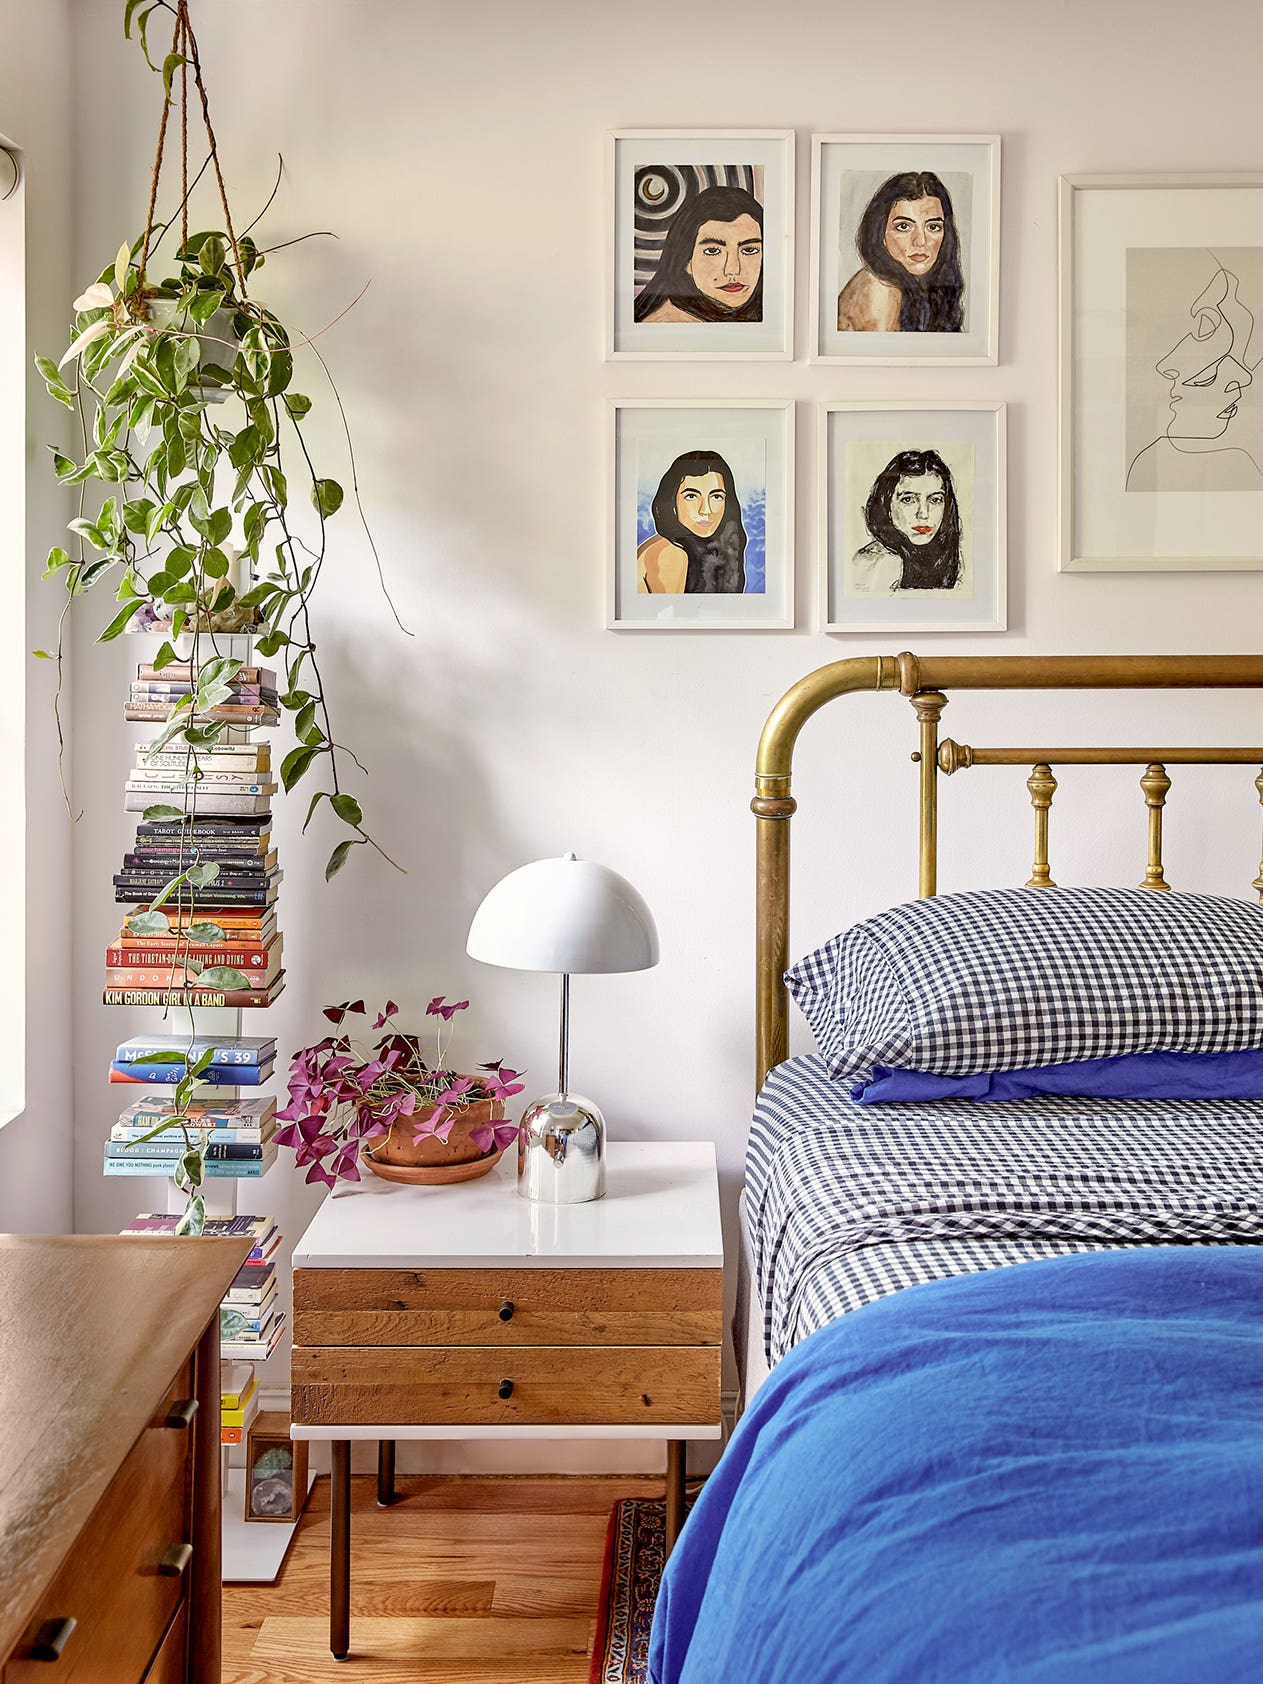 I’ve Toured 100-Plus Rentals—These Are the Apartment Deal Breakers I Look For